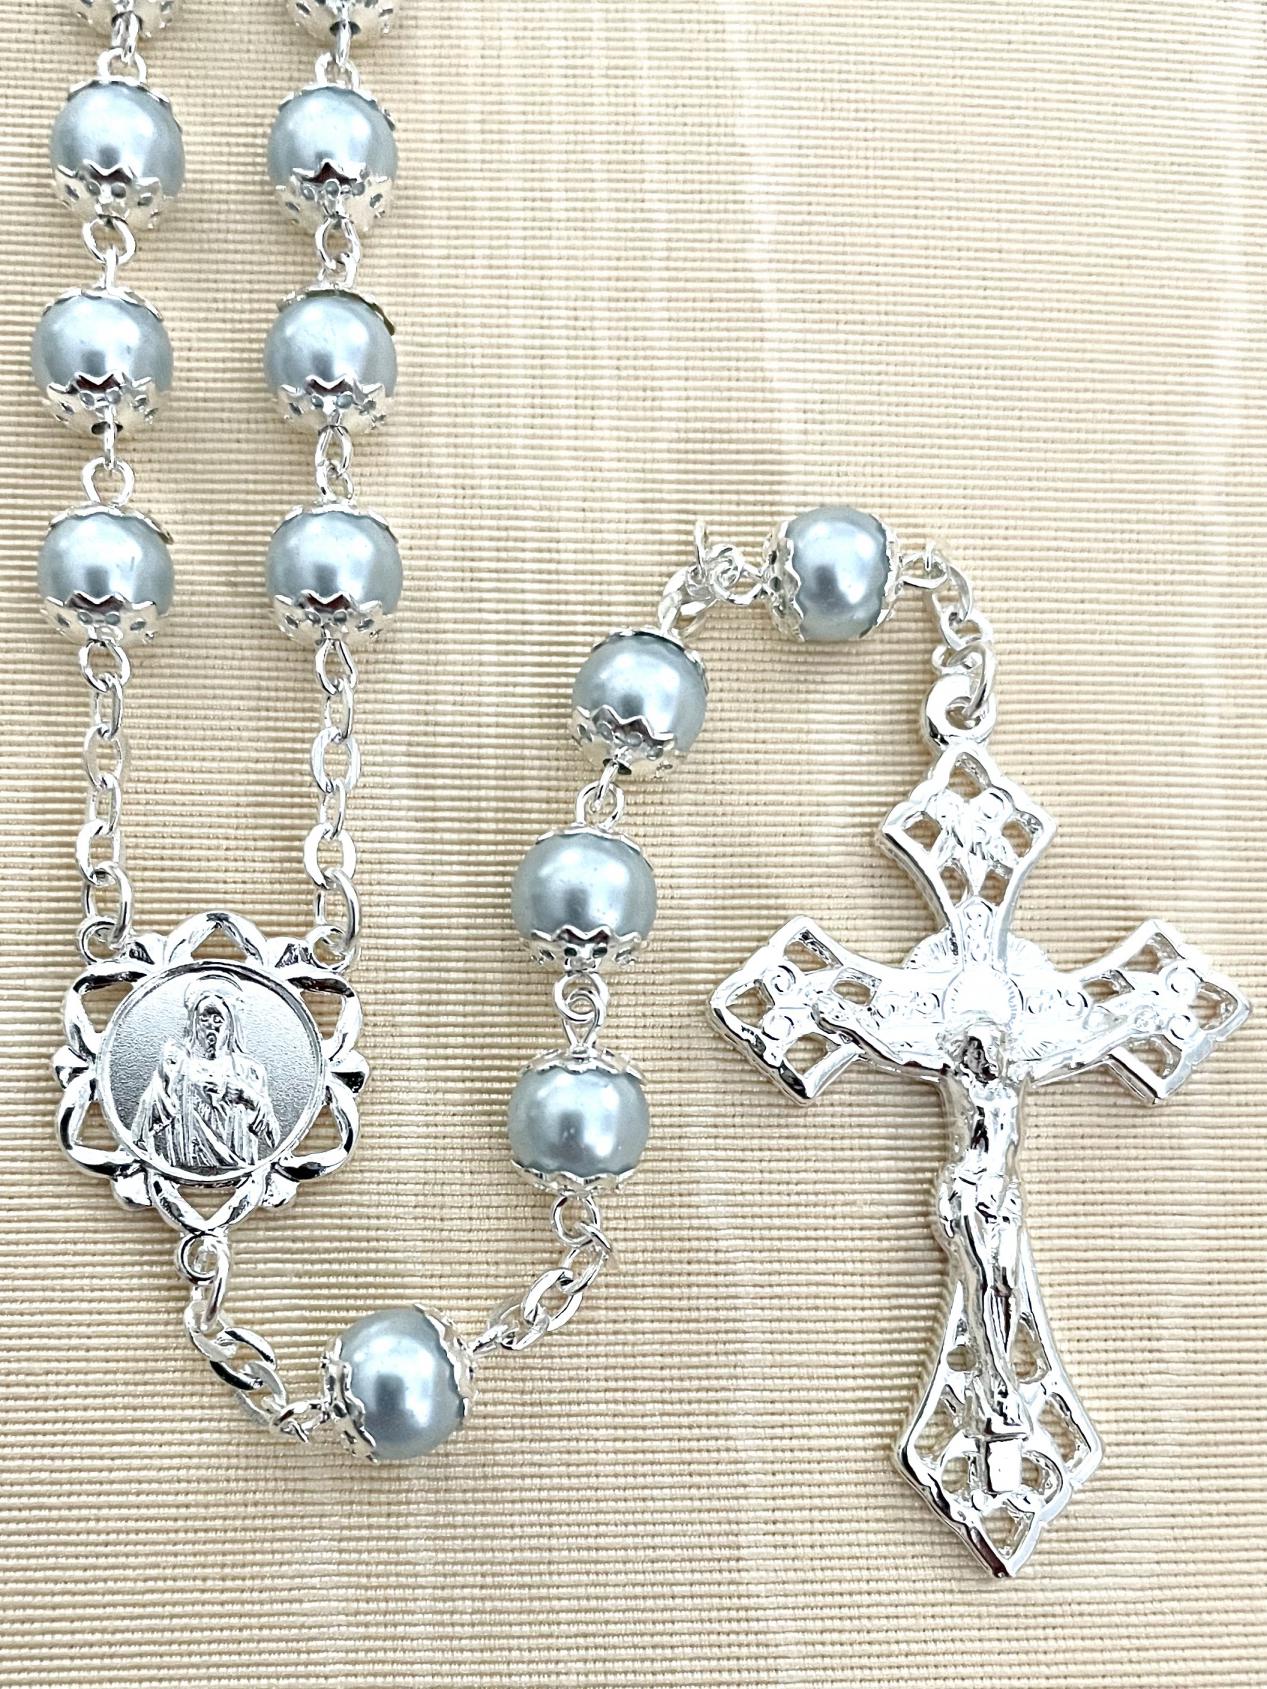 7mm BLUE PEARL DOUBLE CAPPED ROSARY WITH STERLING SILVER PLATED CRUCIFIX AND CENTER GIFT BOXED